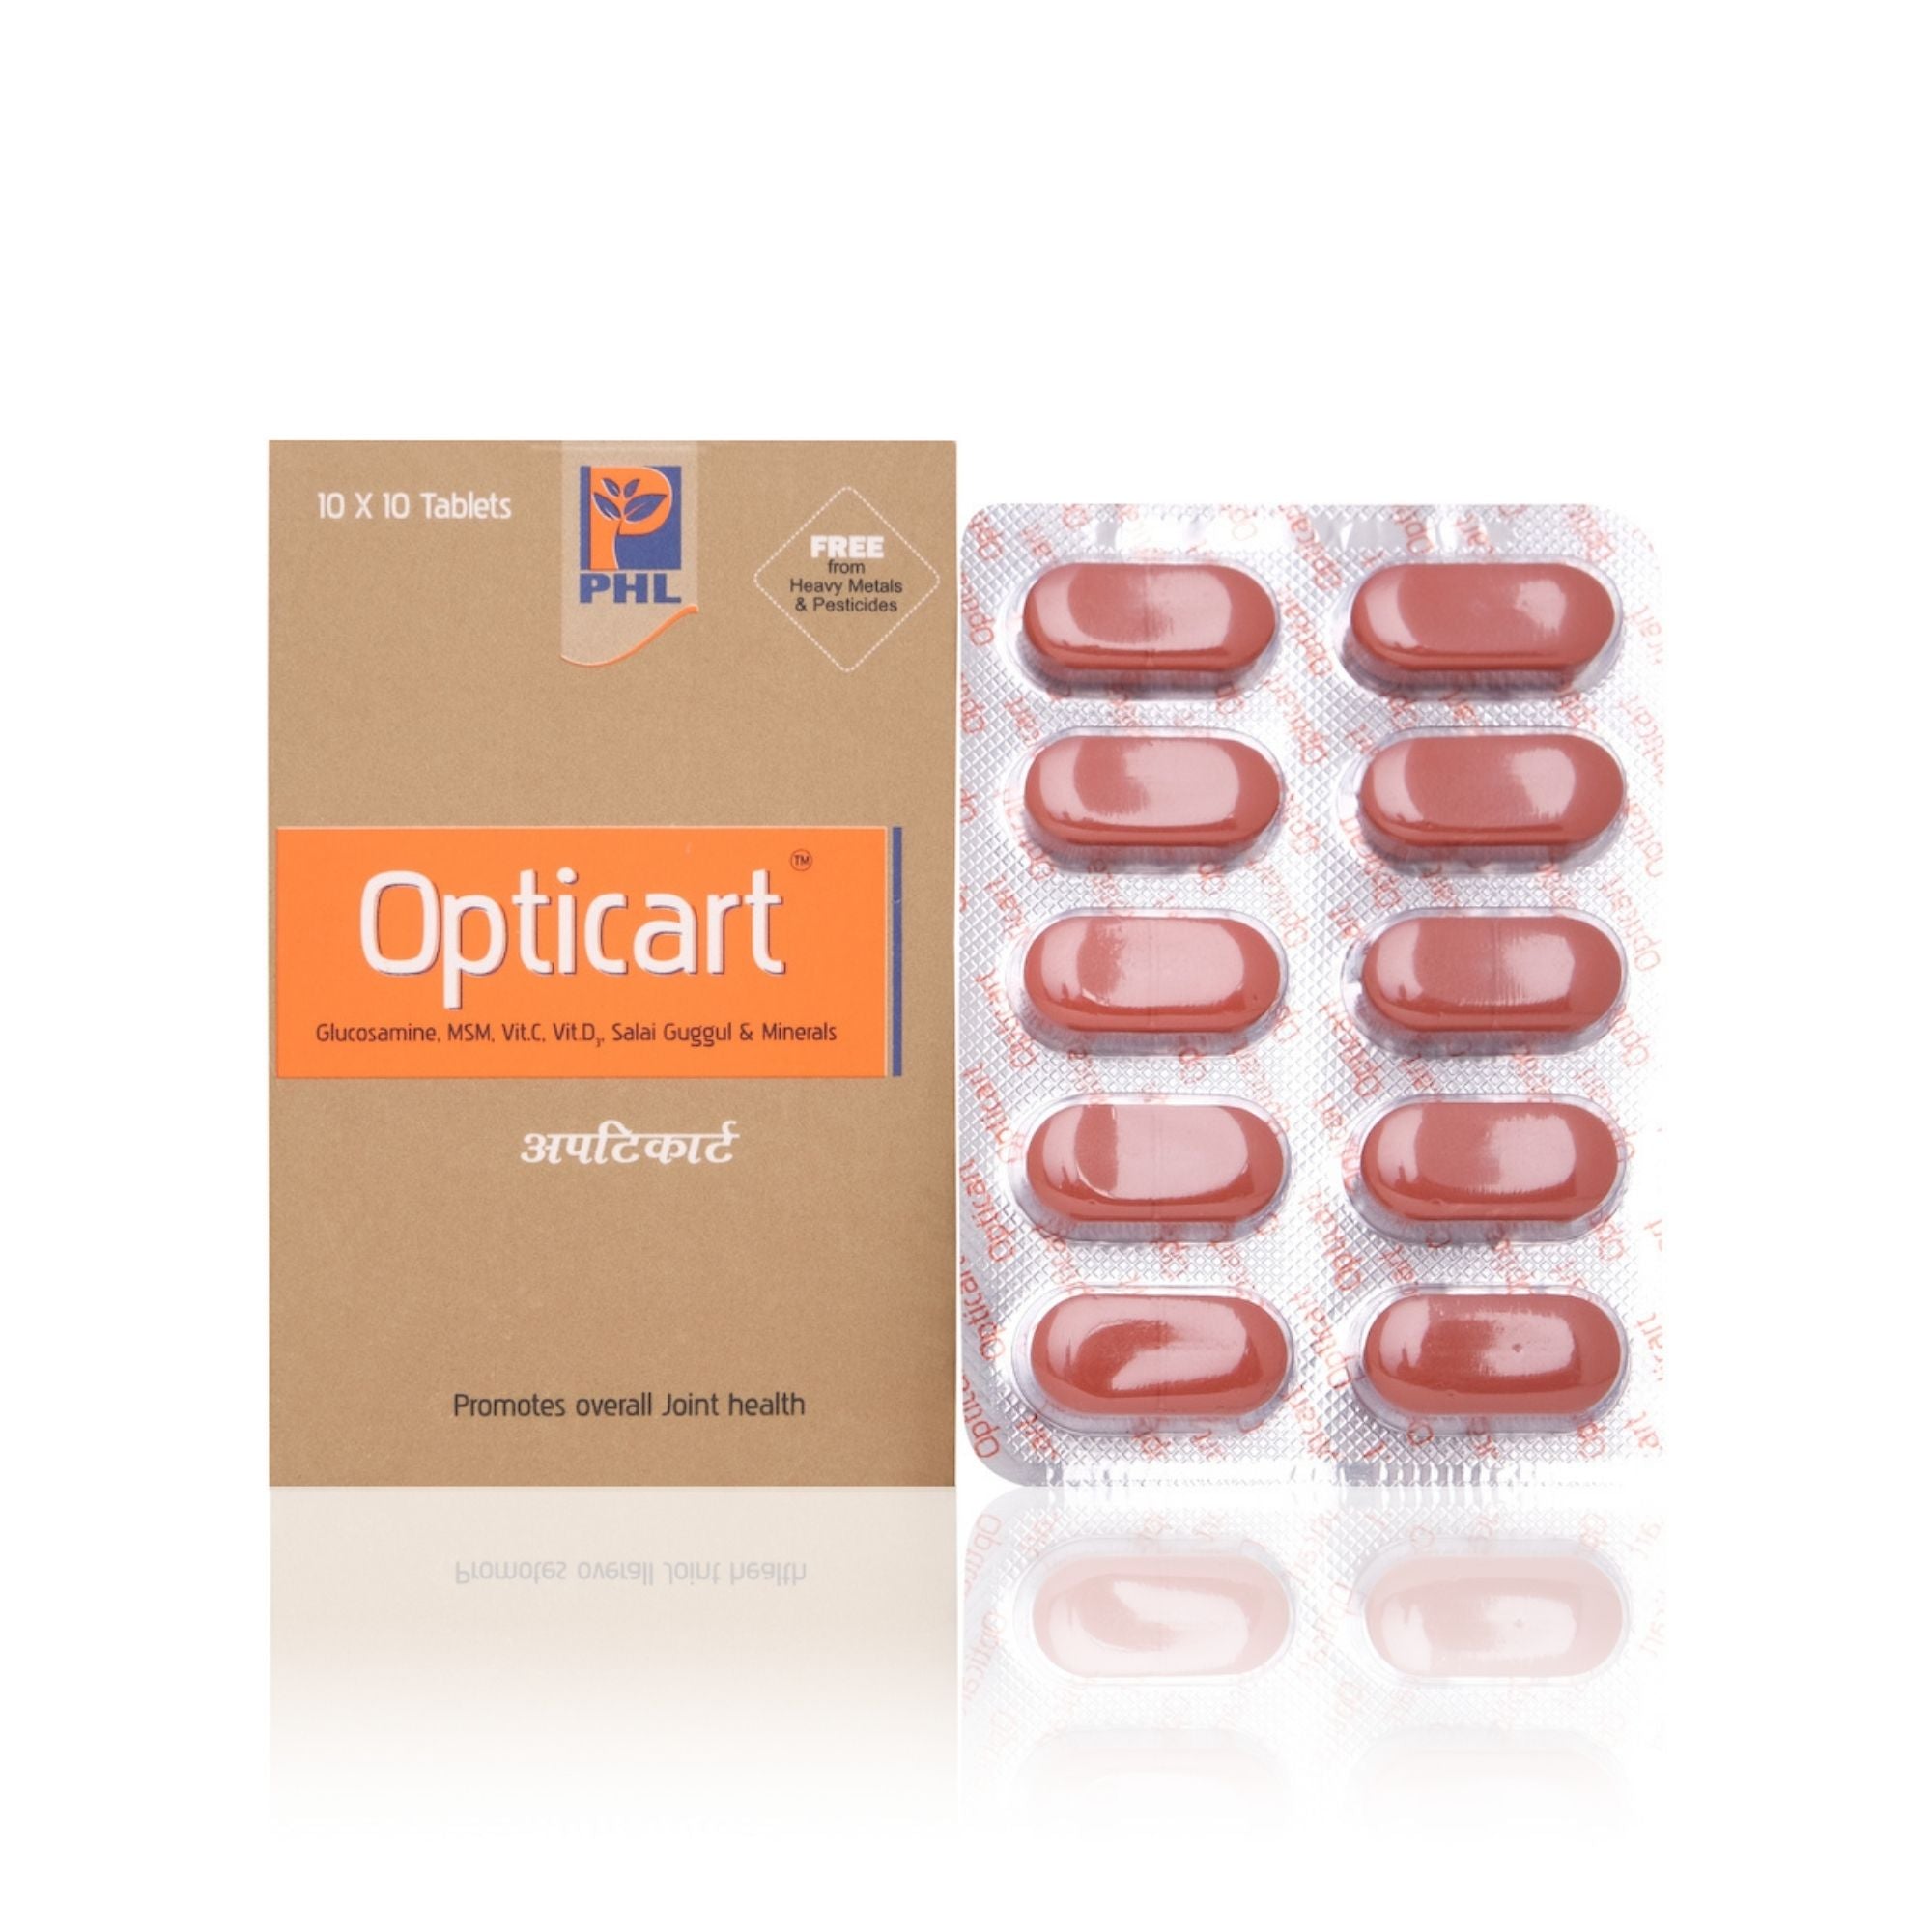 Planet Herbs Lifesciences Opticart Tablets (Pack of 10 x 10 Tablets)